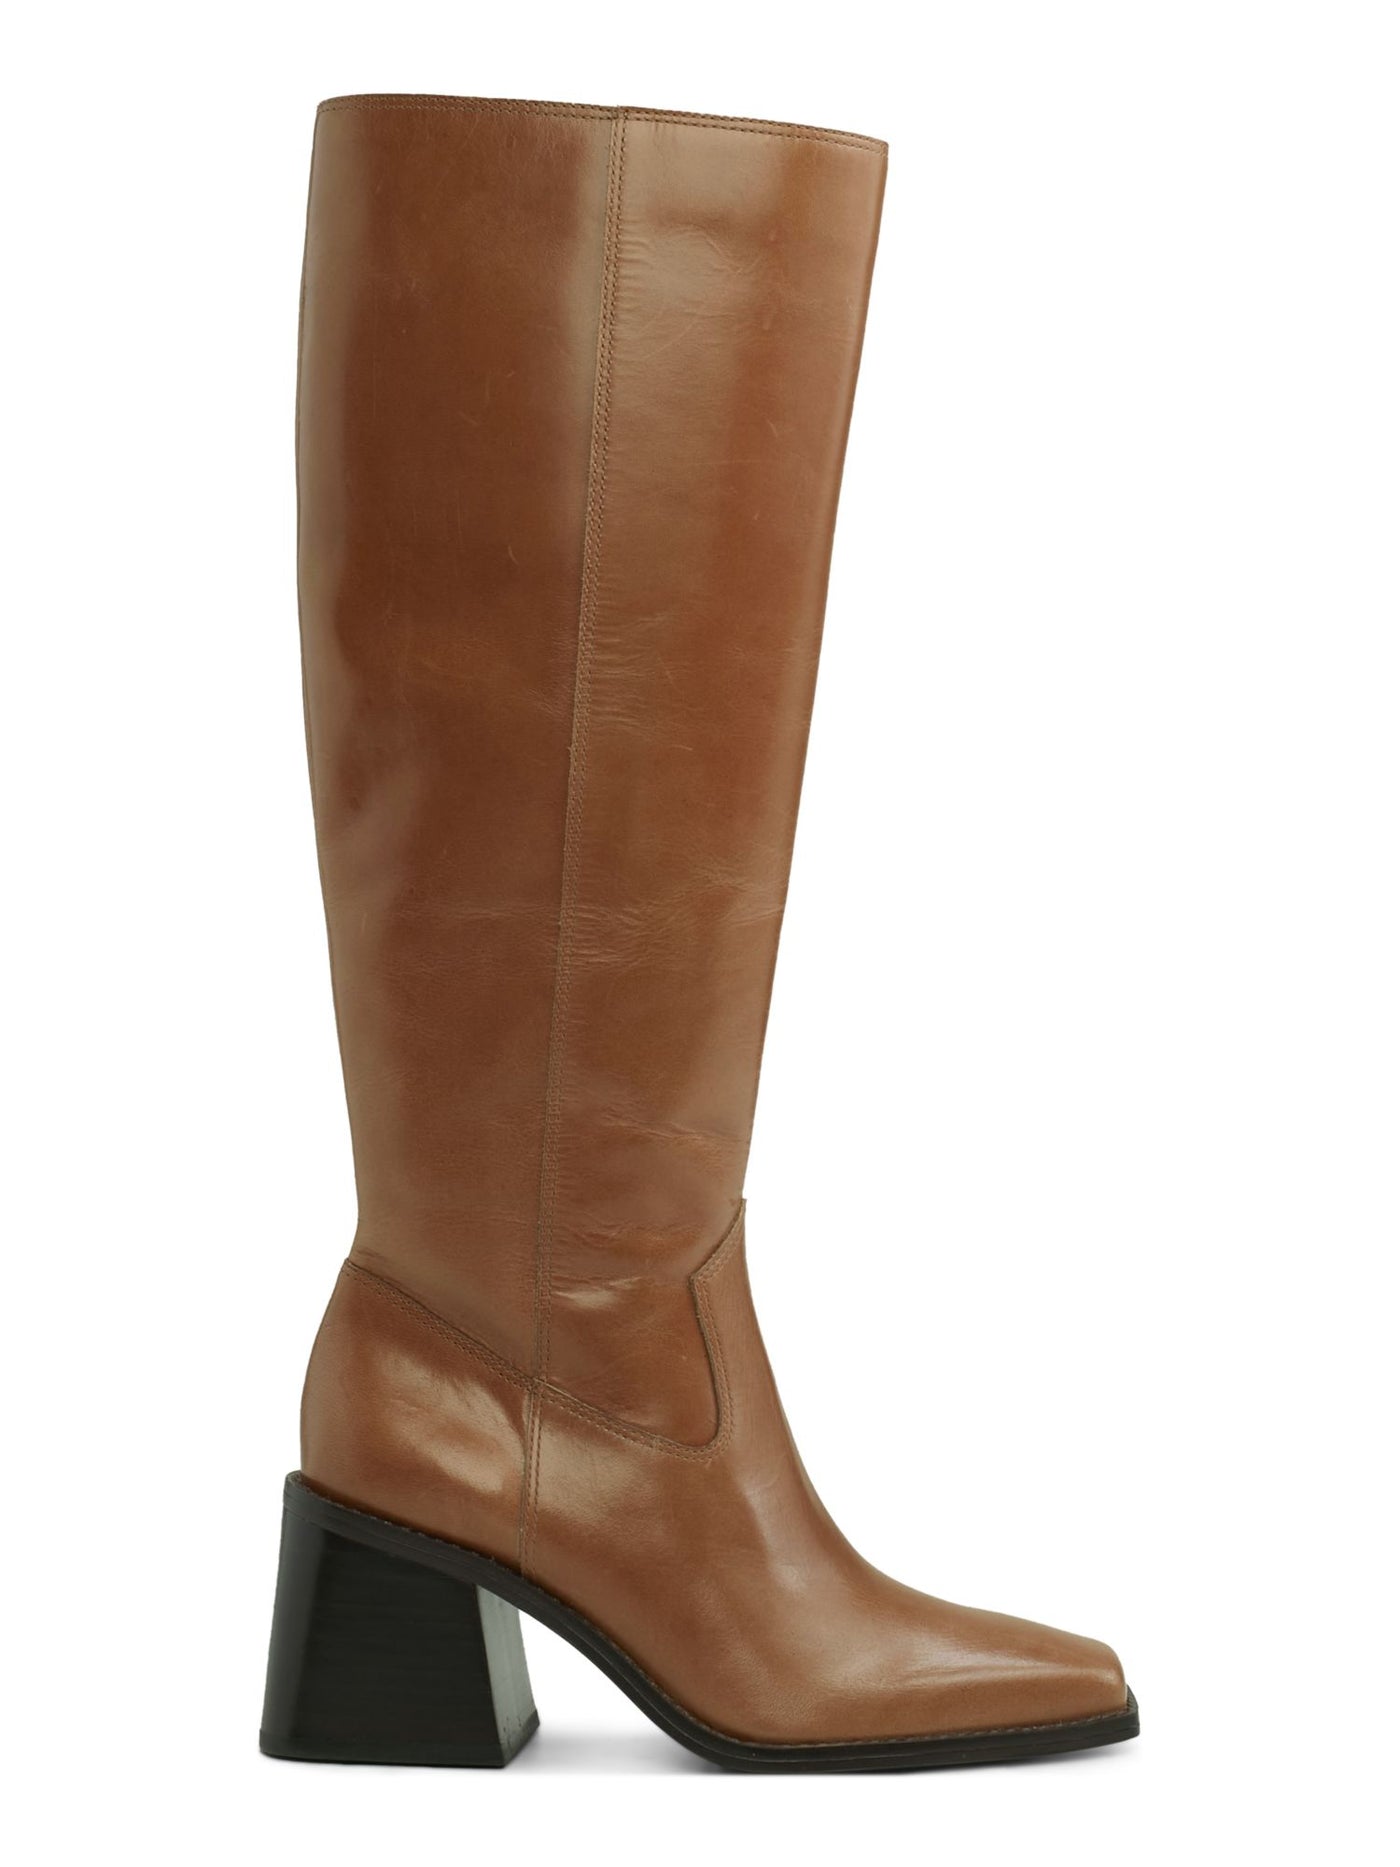 VINCE CAMUTO Womens Brown Goring Cushioned Sangeti Square Toe Stacked Heel Zip-Up Leather Riding Boot 10 M